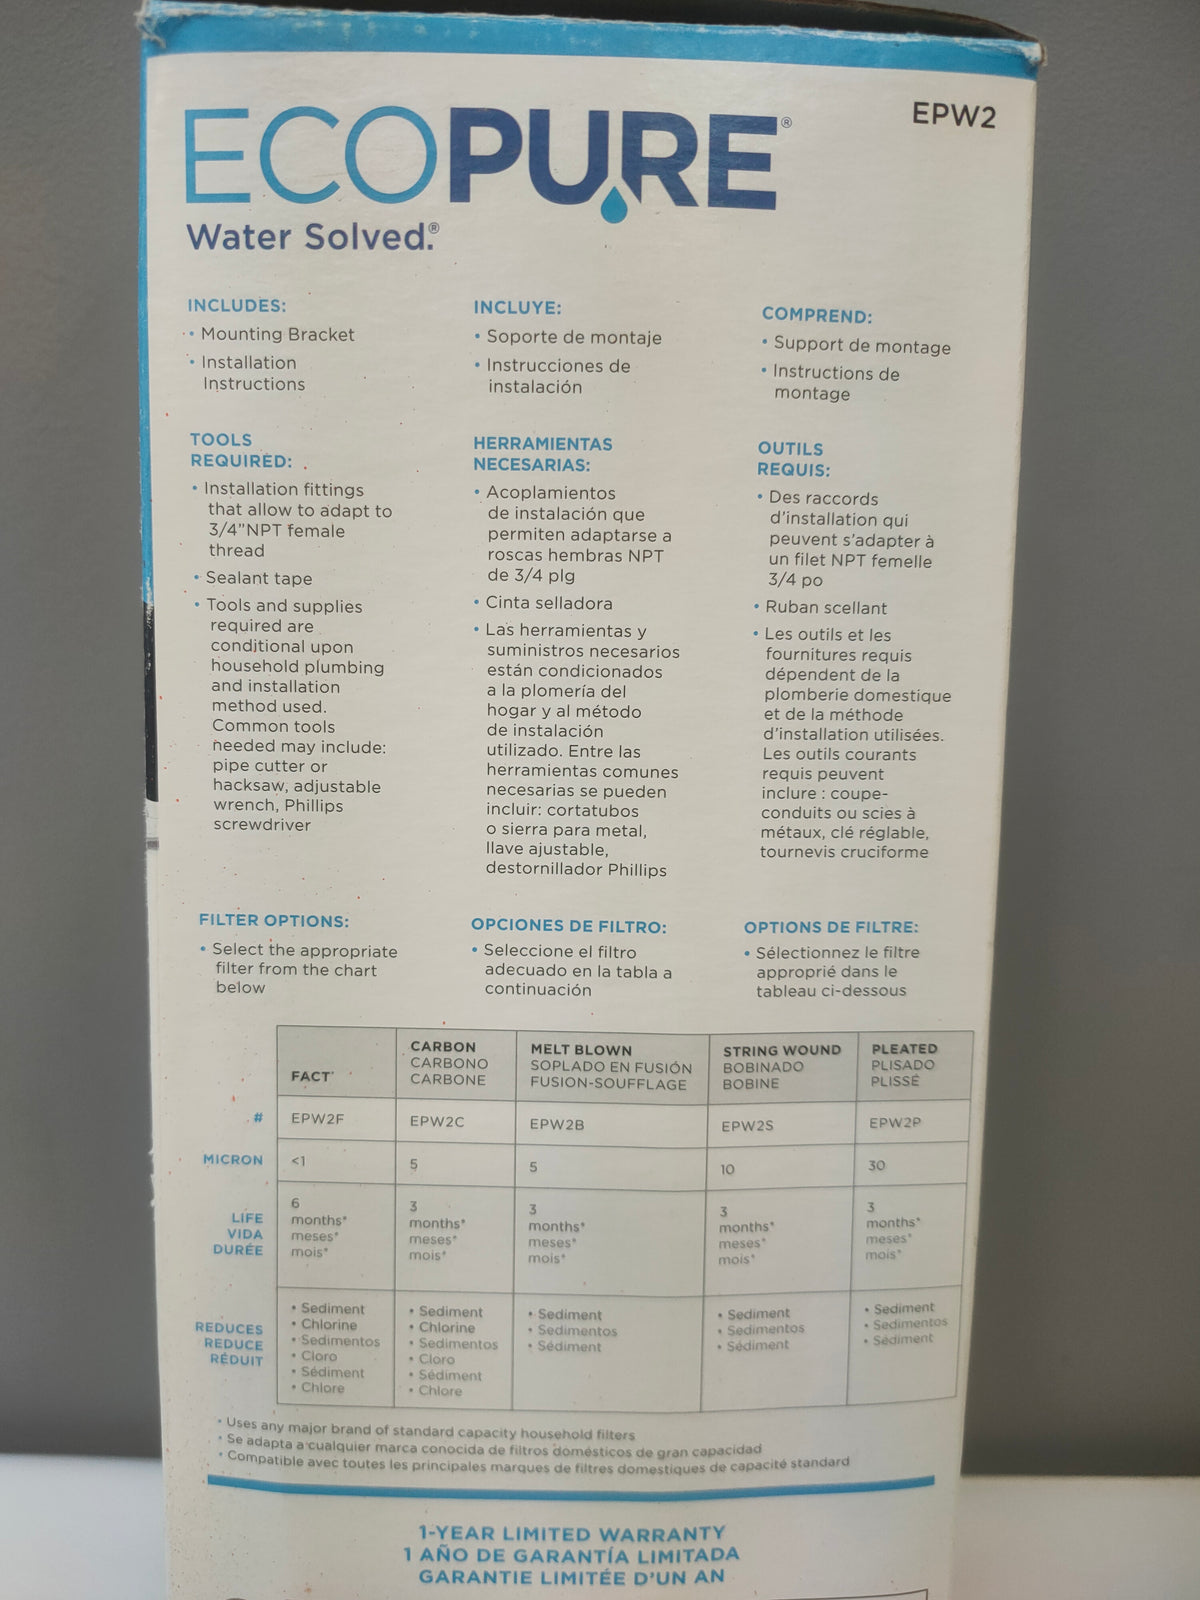 Whole Home Water Filtration System